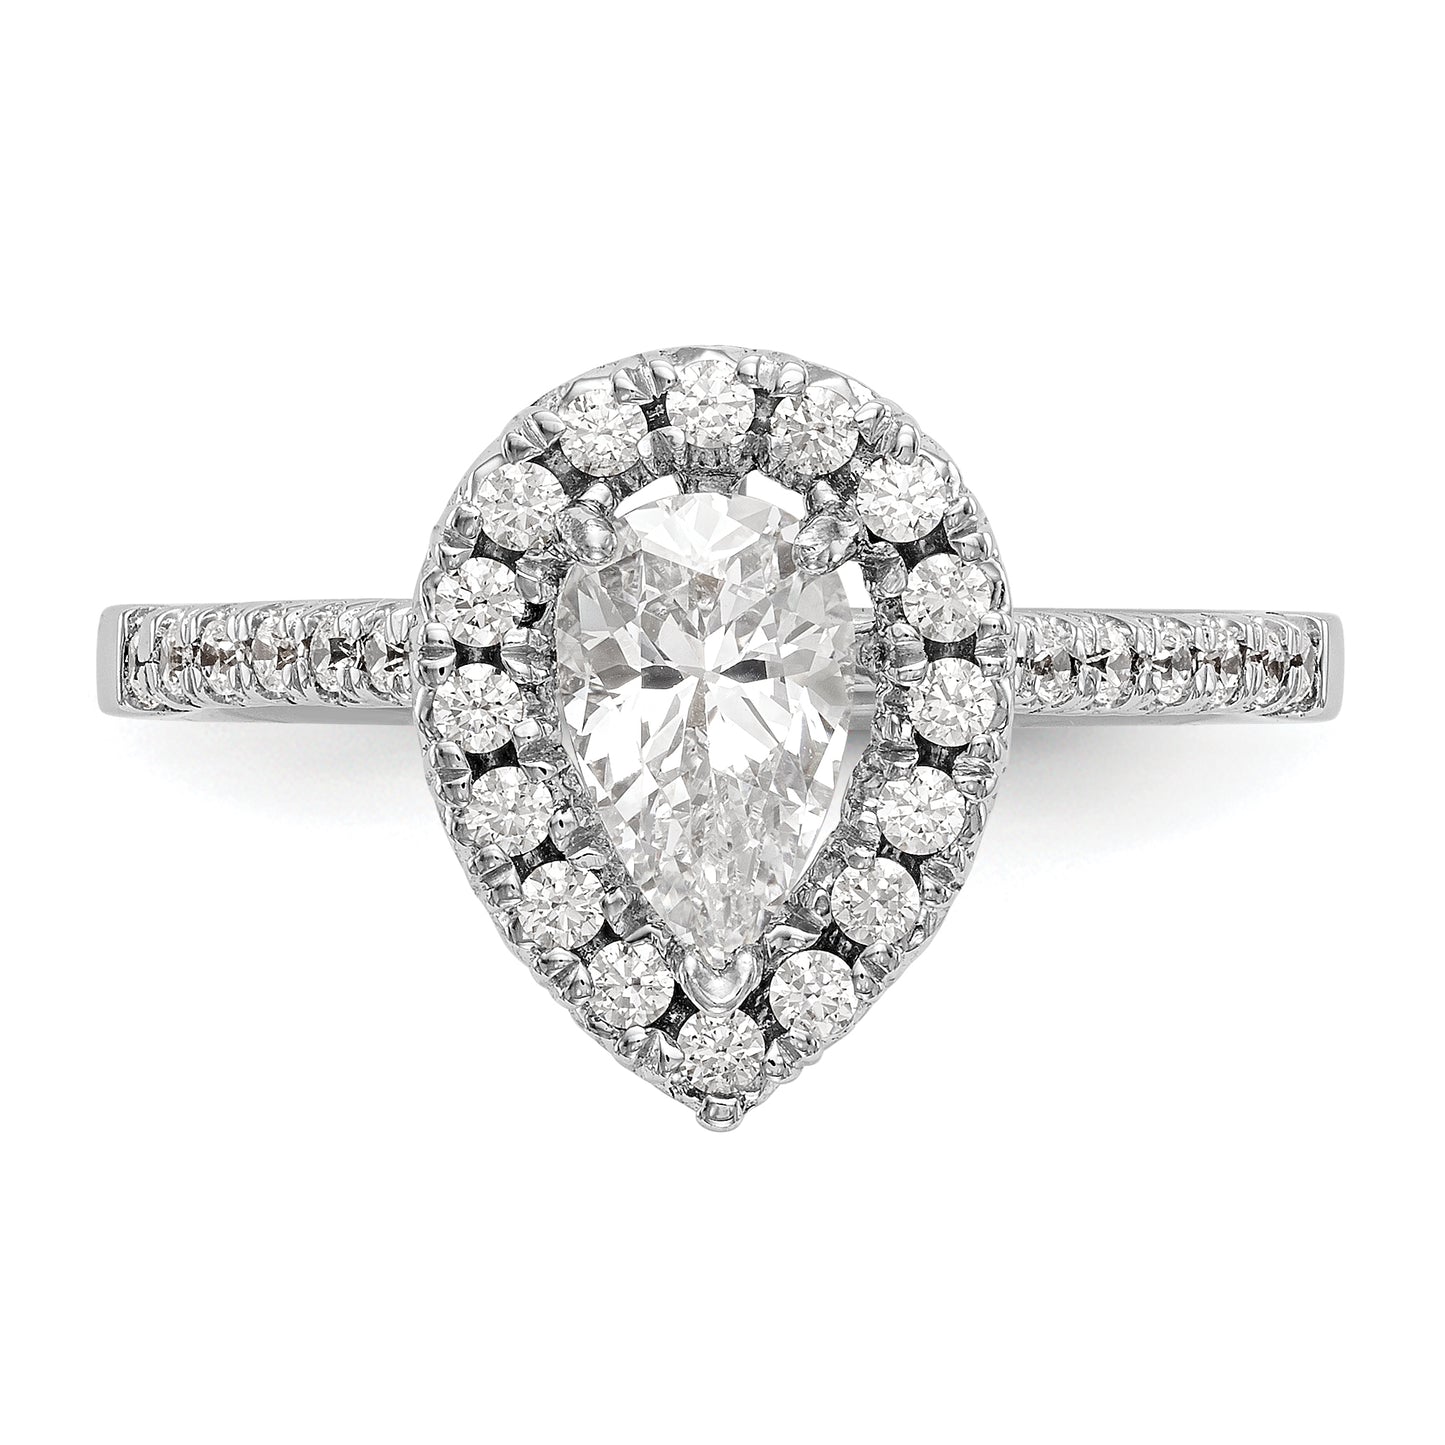 14KW 1/2 CT HALO SEMI FOR 1 1/5 PEAR CTR